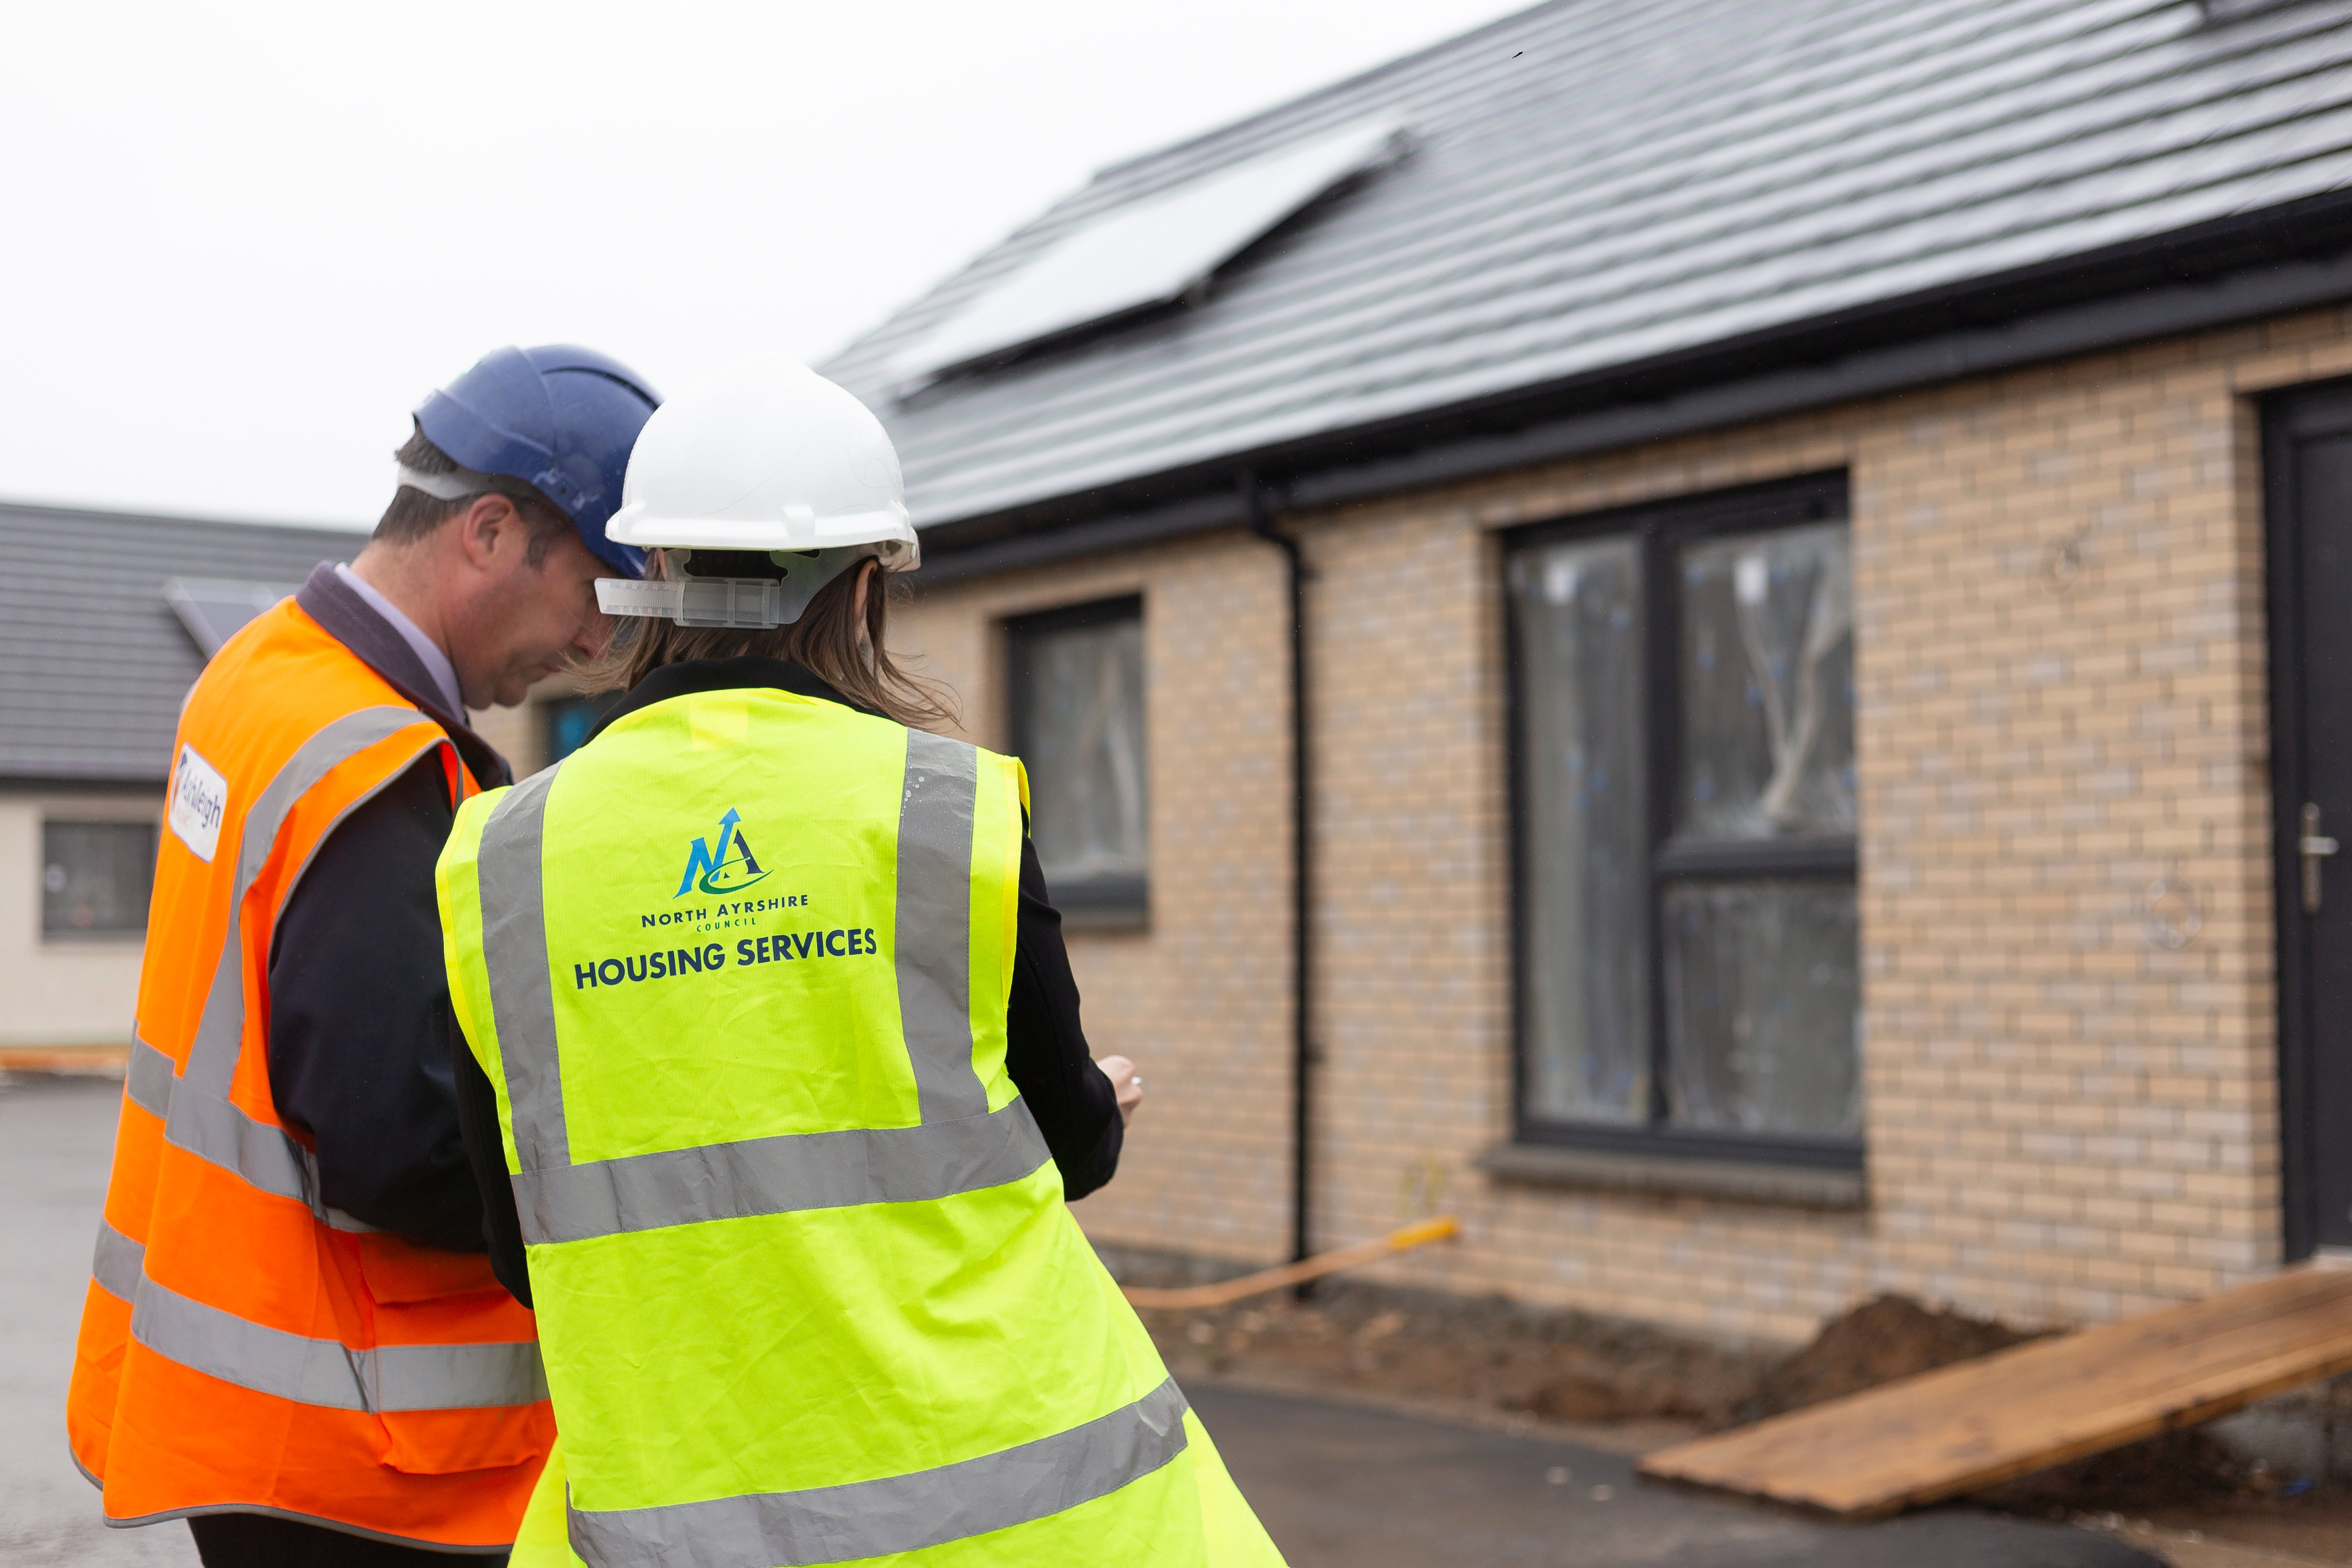 North Ayrshire Council commits to build 1,625 new homes over five years